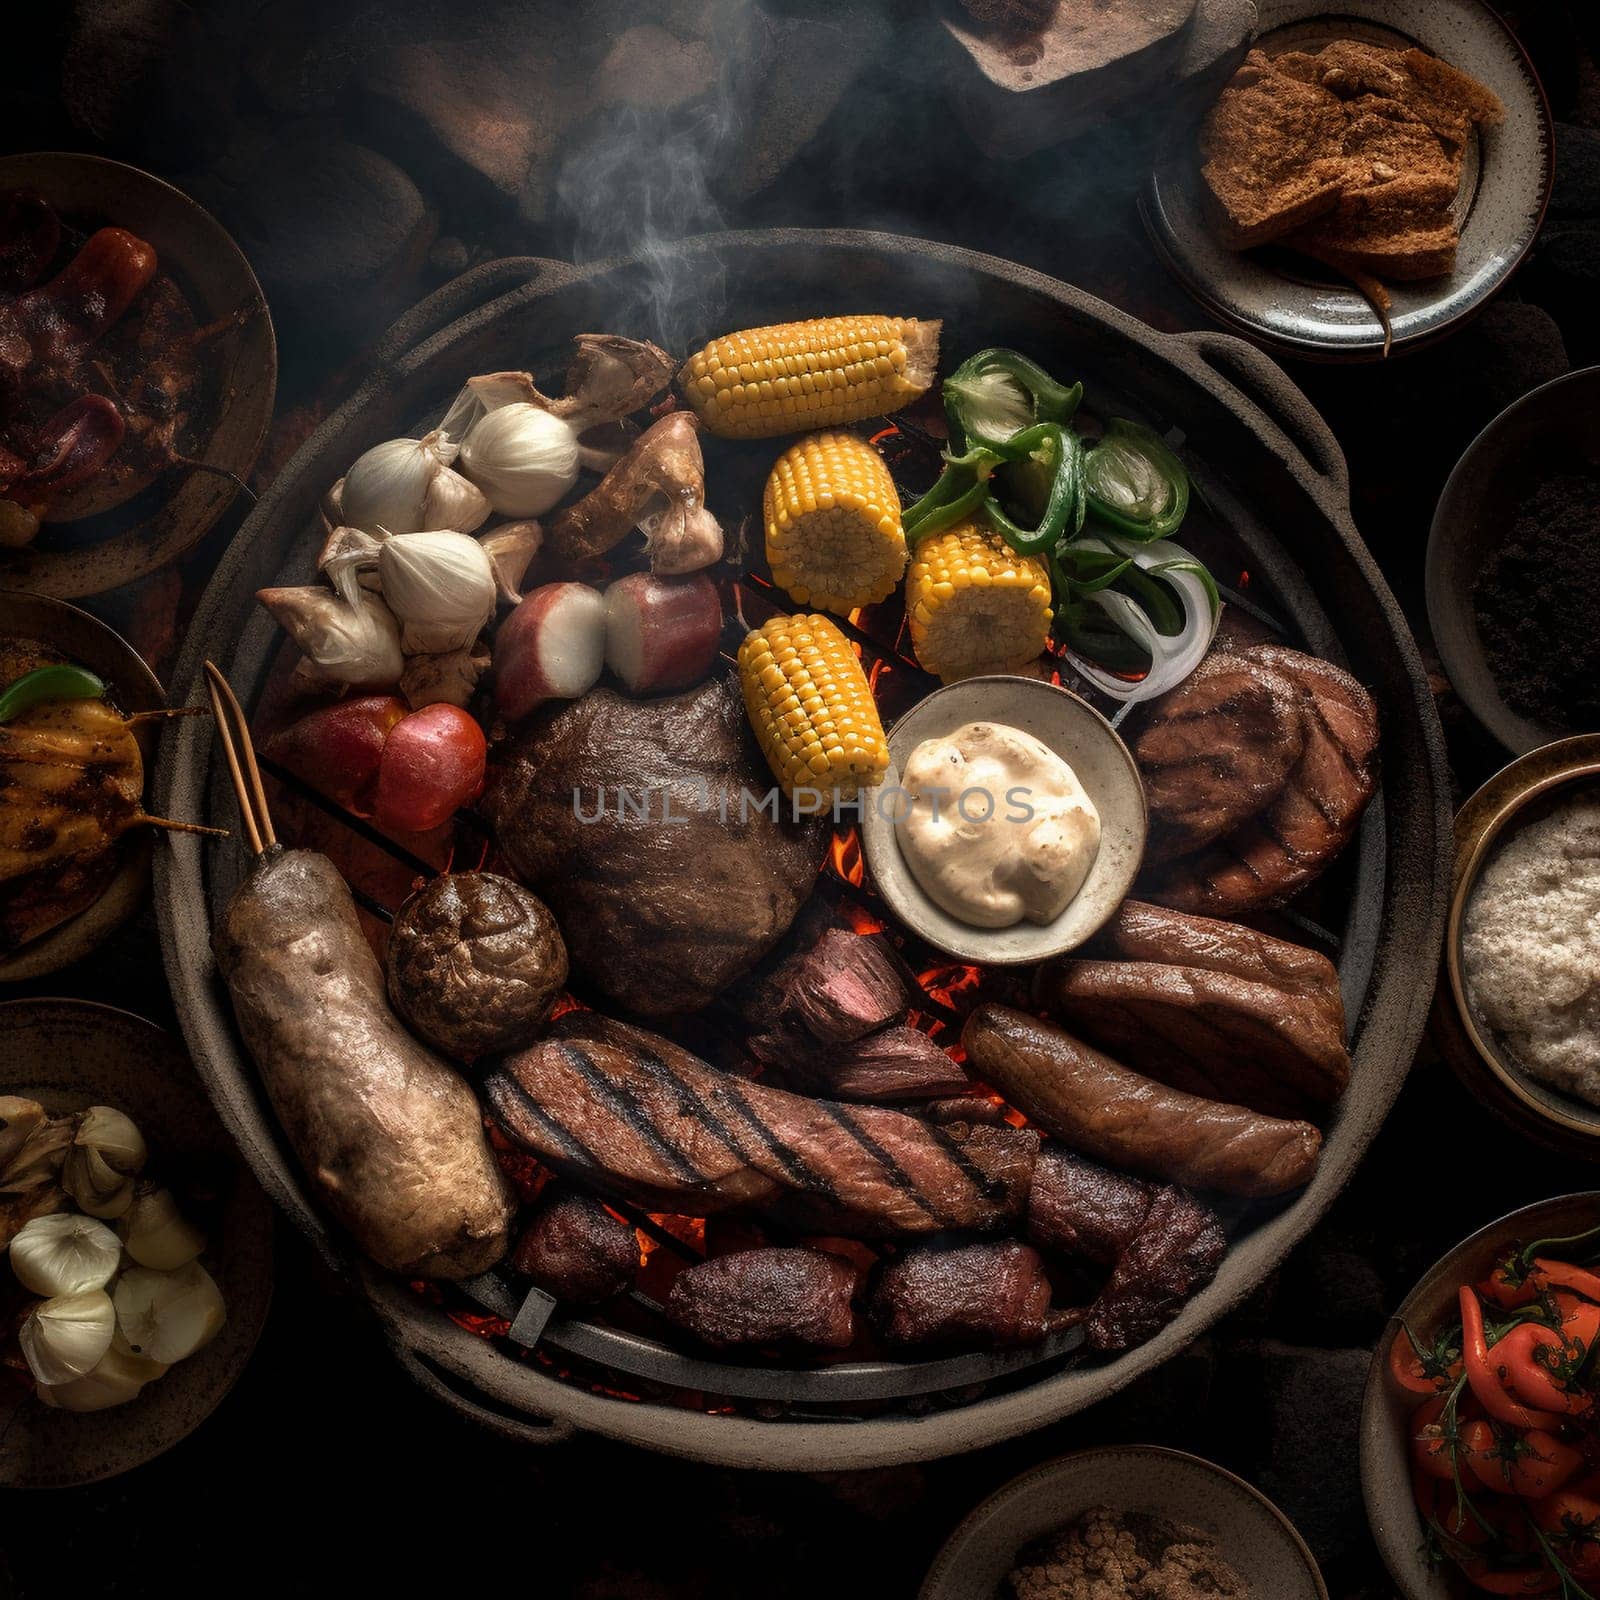 Argentina Asado (Barbecue) with Grilled Meats, Vegetables, and Chimichurri Sauce by Sahin